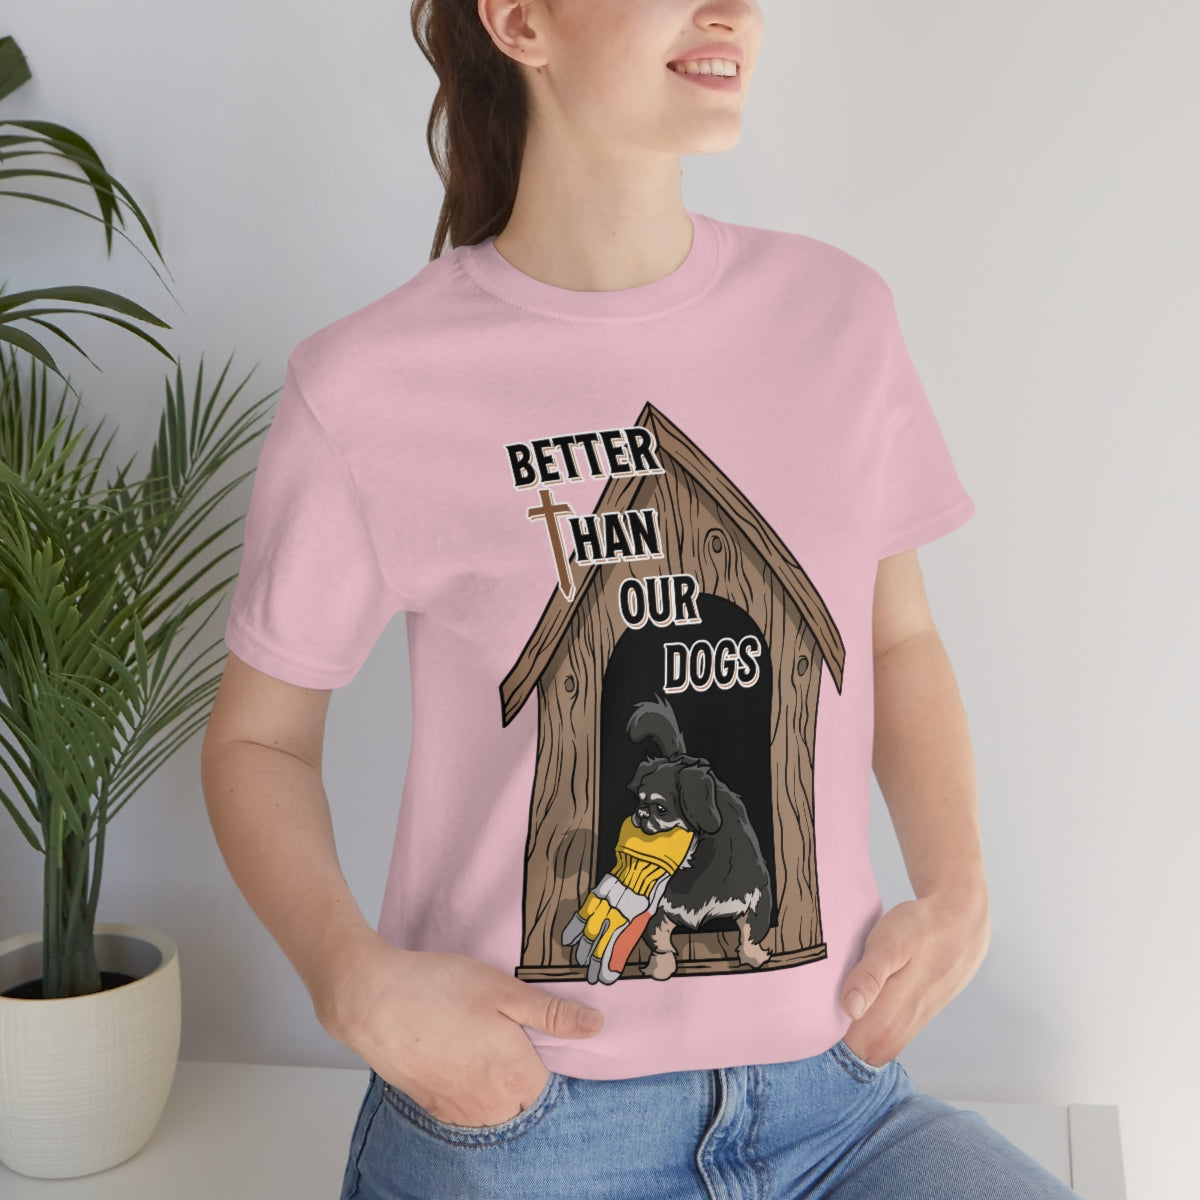 Better Than Our Dogs - Unisex Jersey Short Sleeve Tee